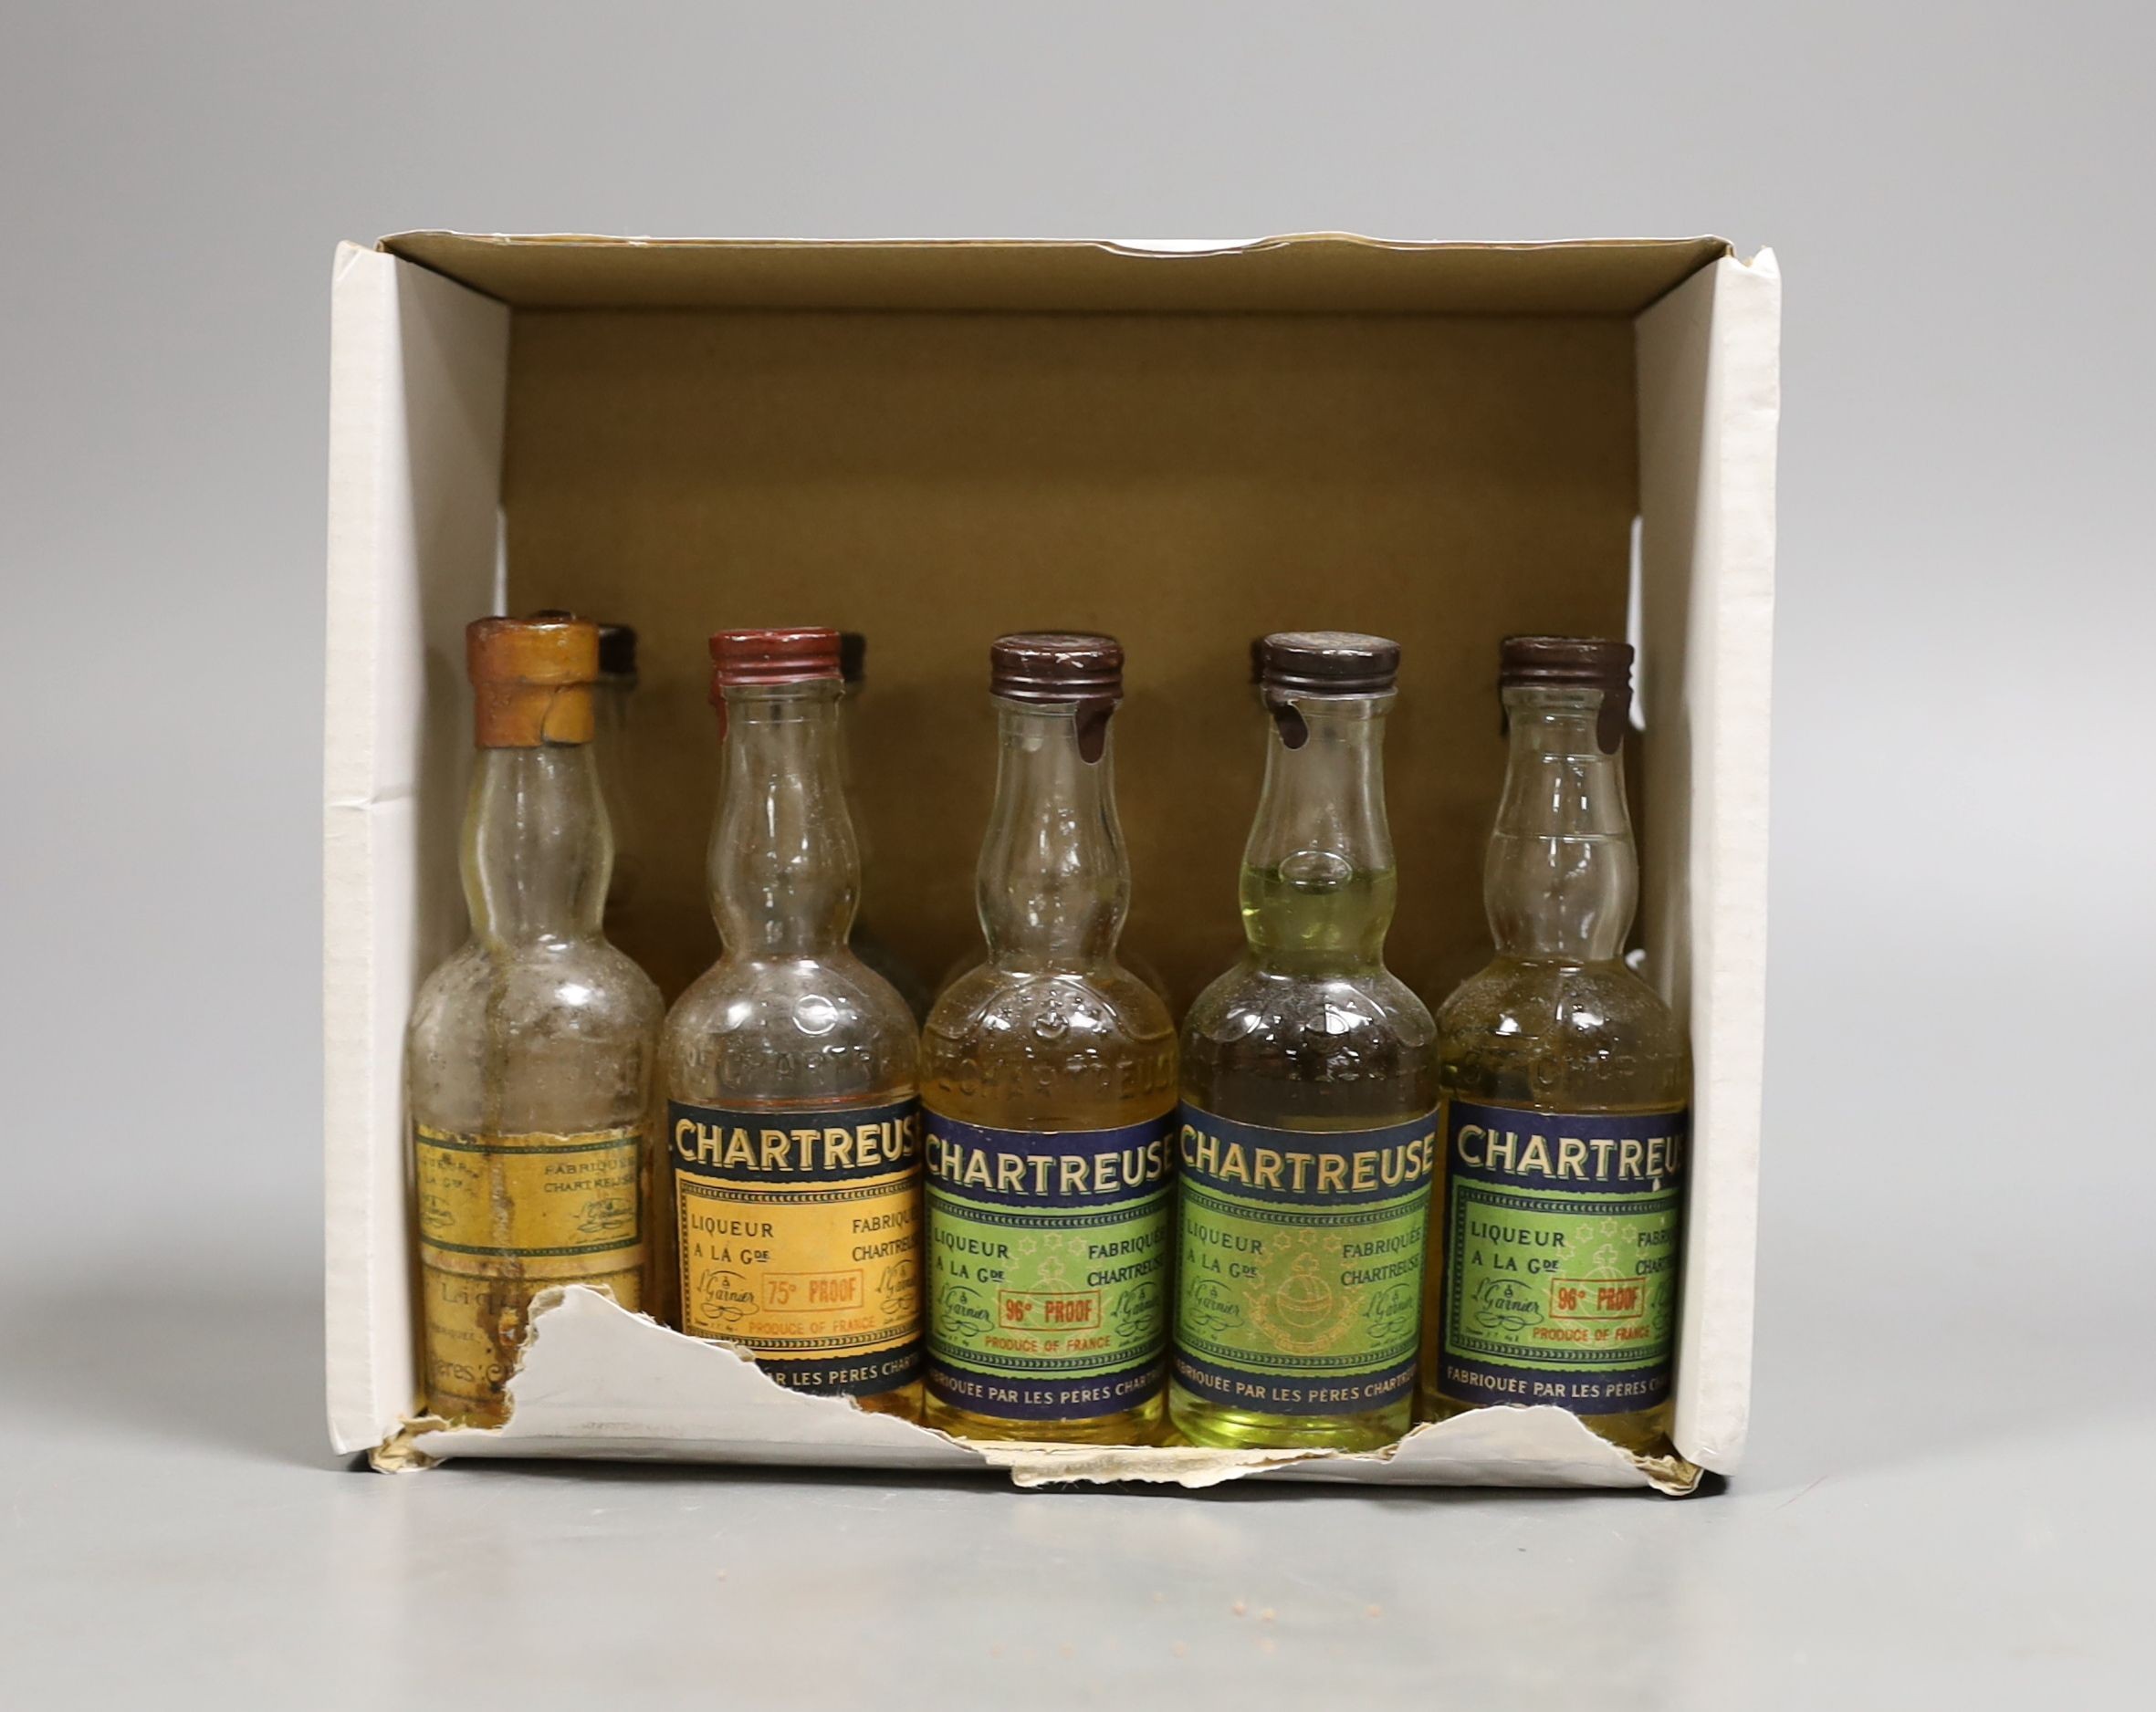 One Chartreuse bottle and ten Chartreuse miniatures